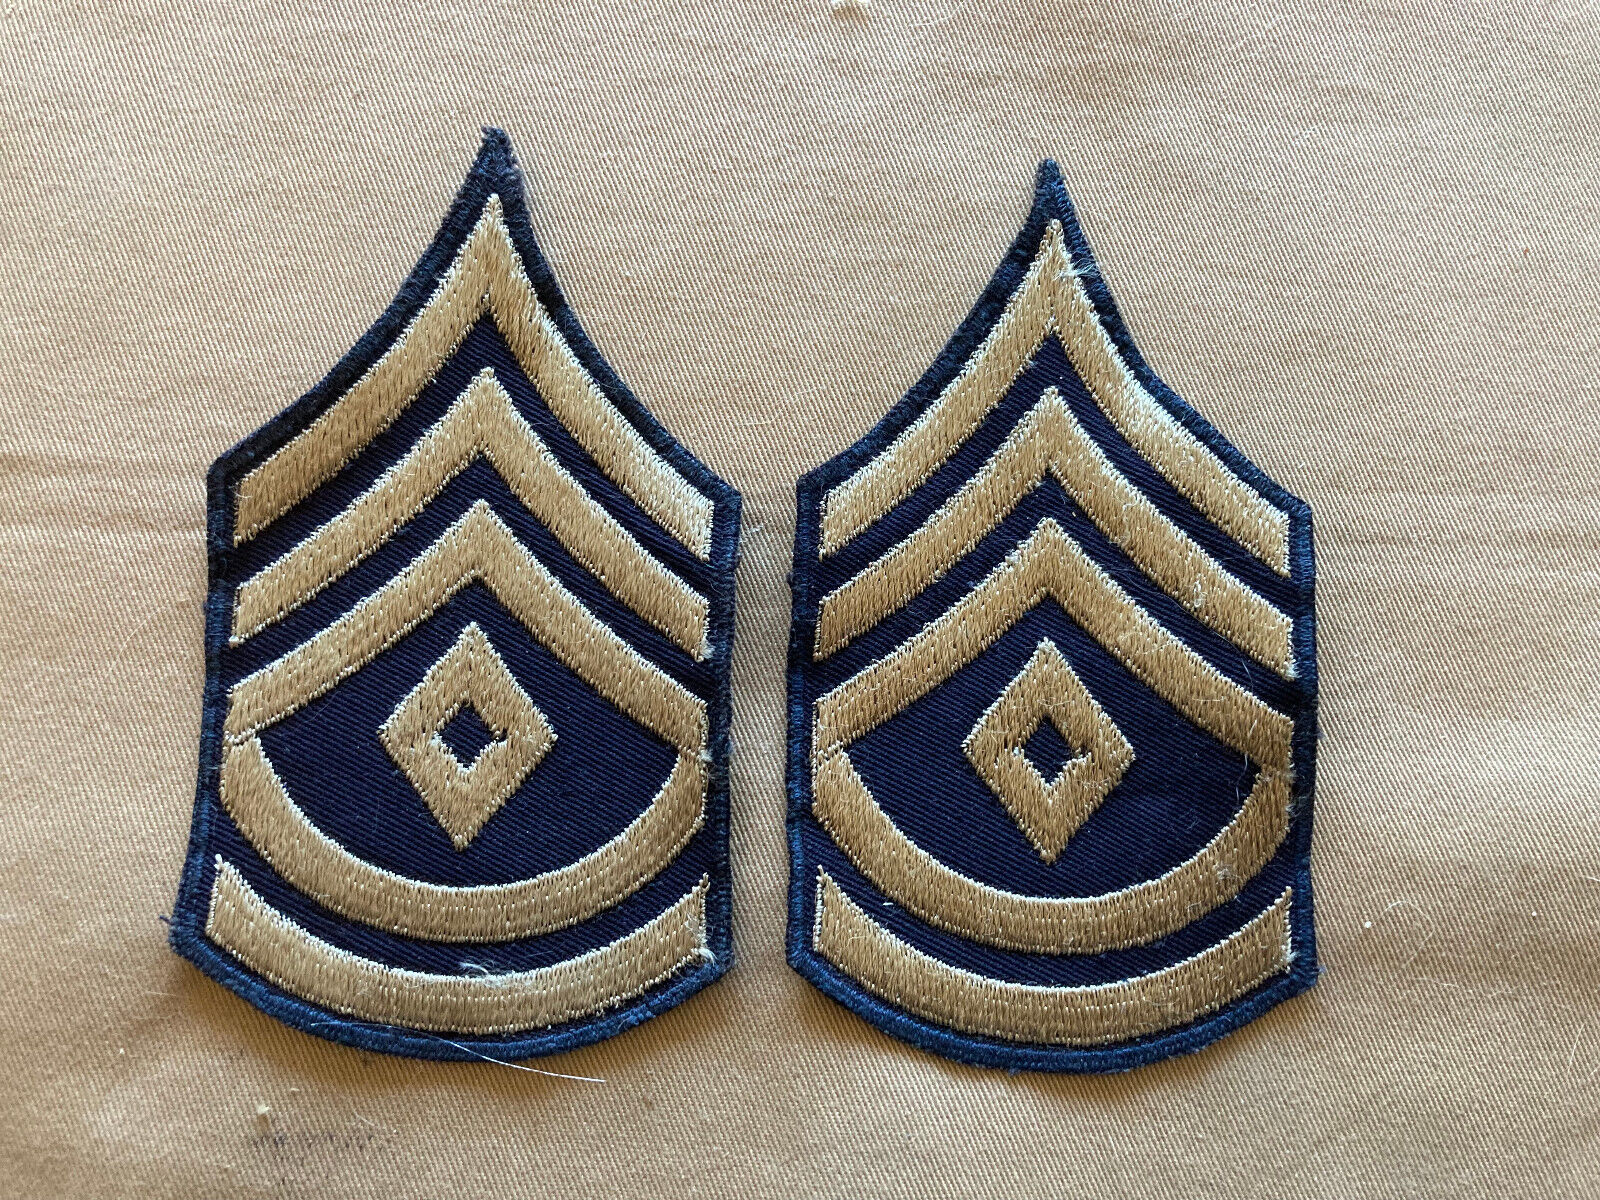 HTF 1941-43 First Sergeant chevron pair on bordered twill from collection